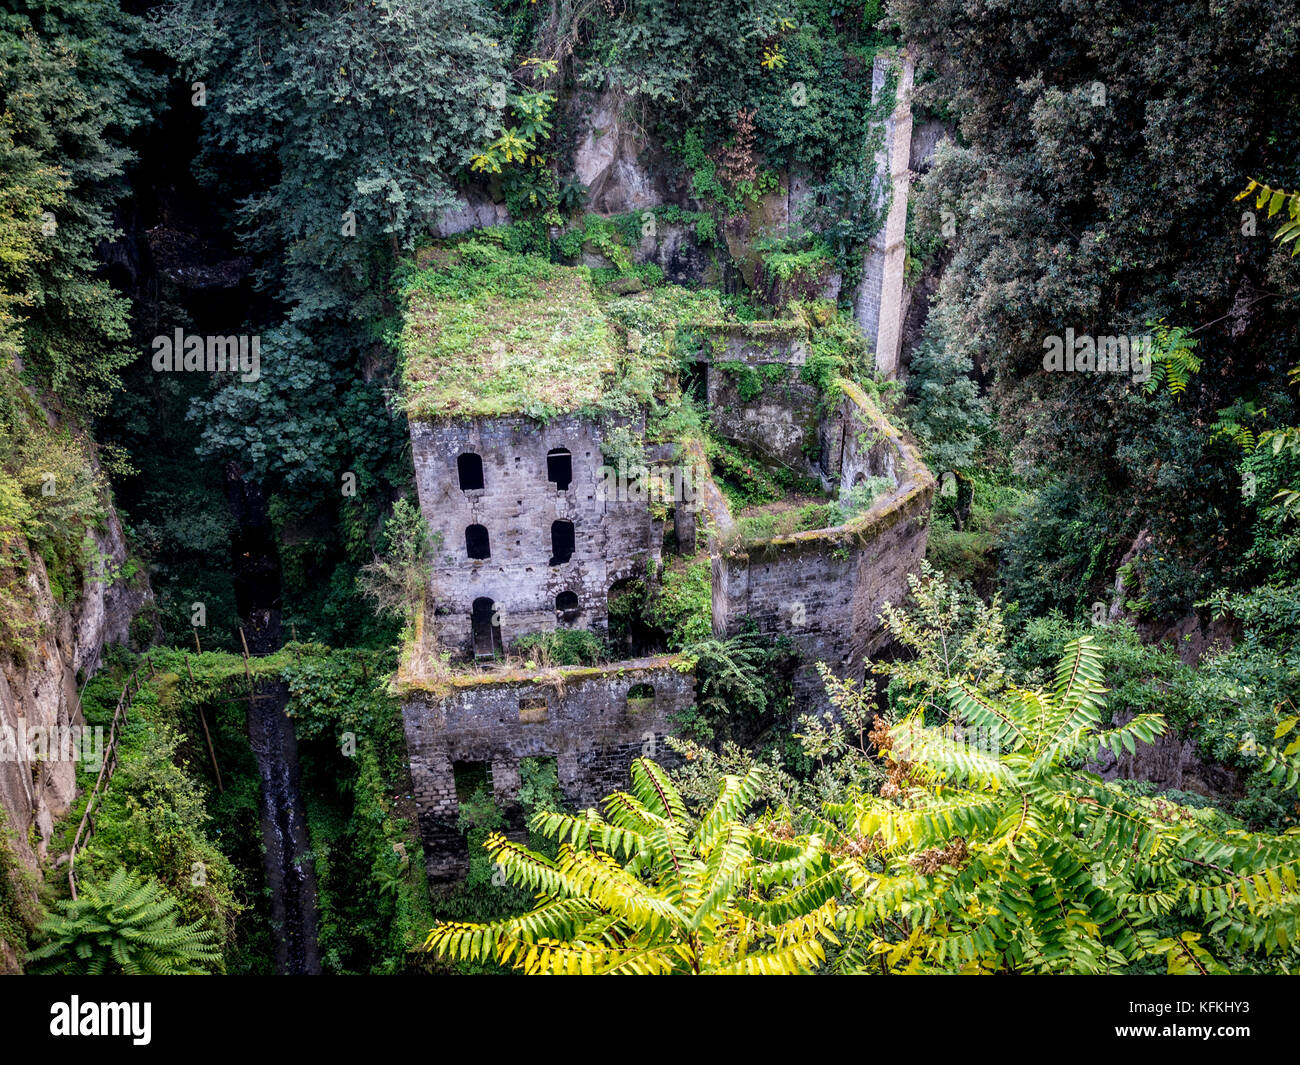 Valle dei Mulini. Ruins of a disused flour mill in a gorge. Sorrento. Italy. Stock Photo